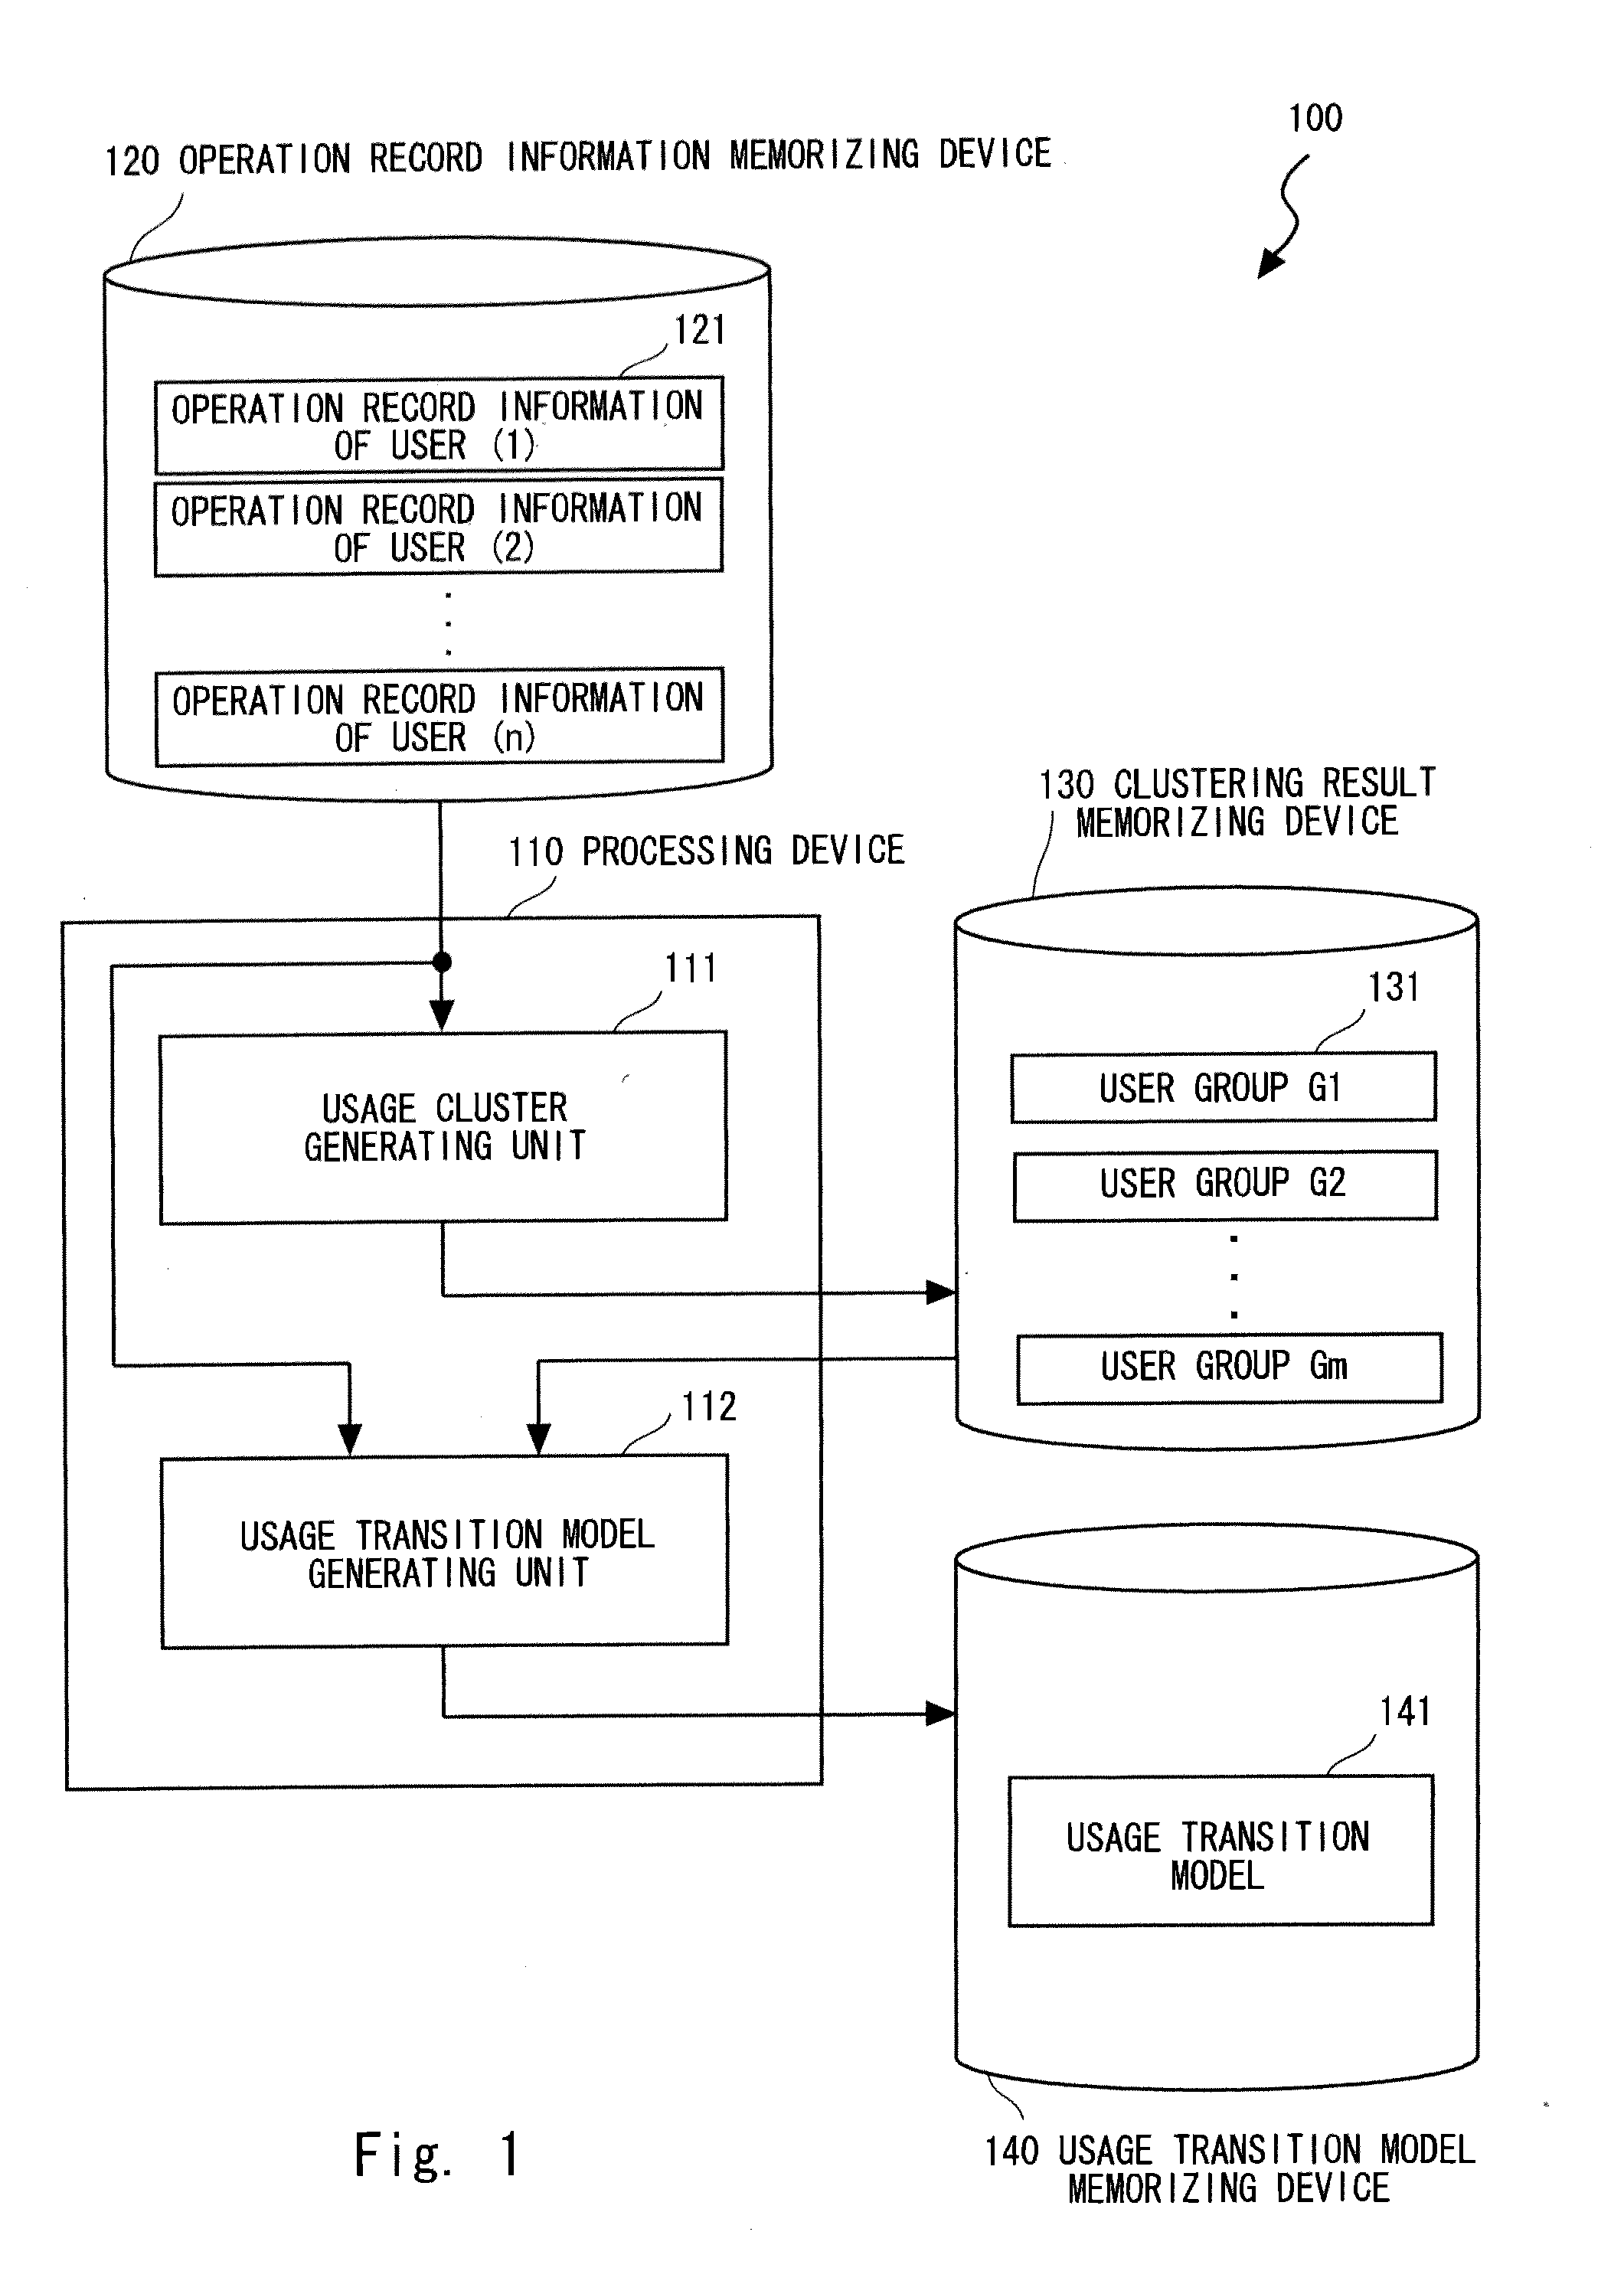 User model processing device